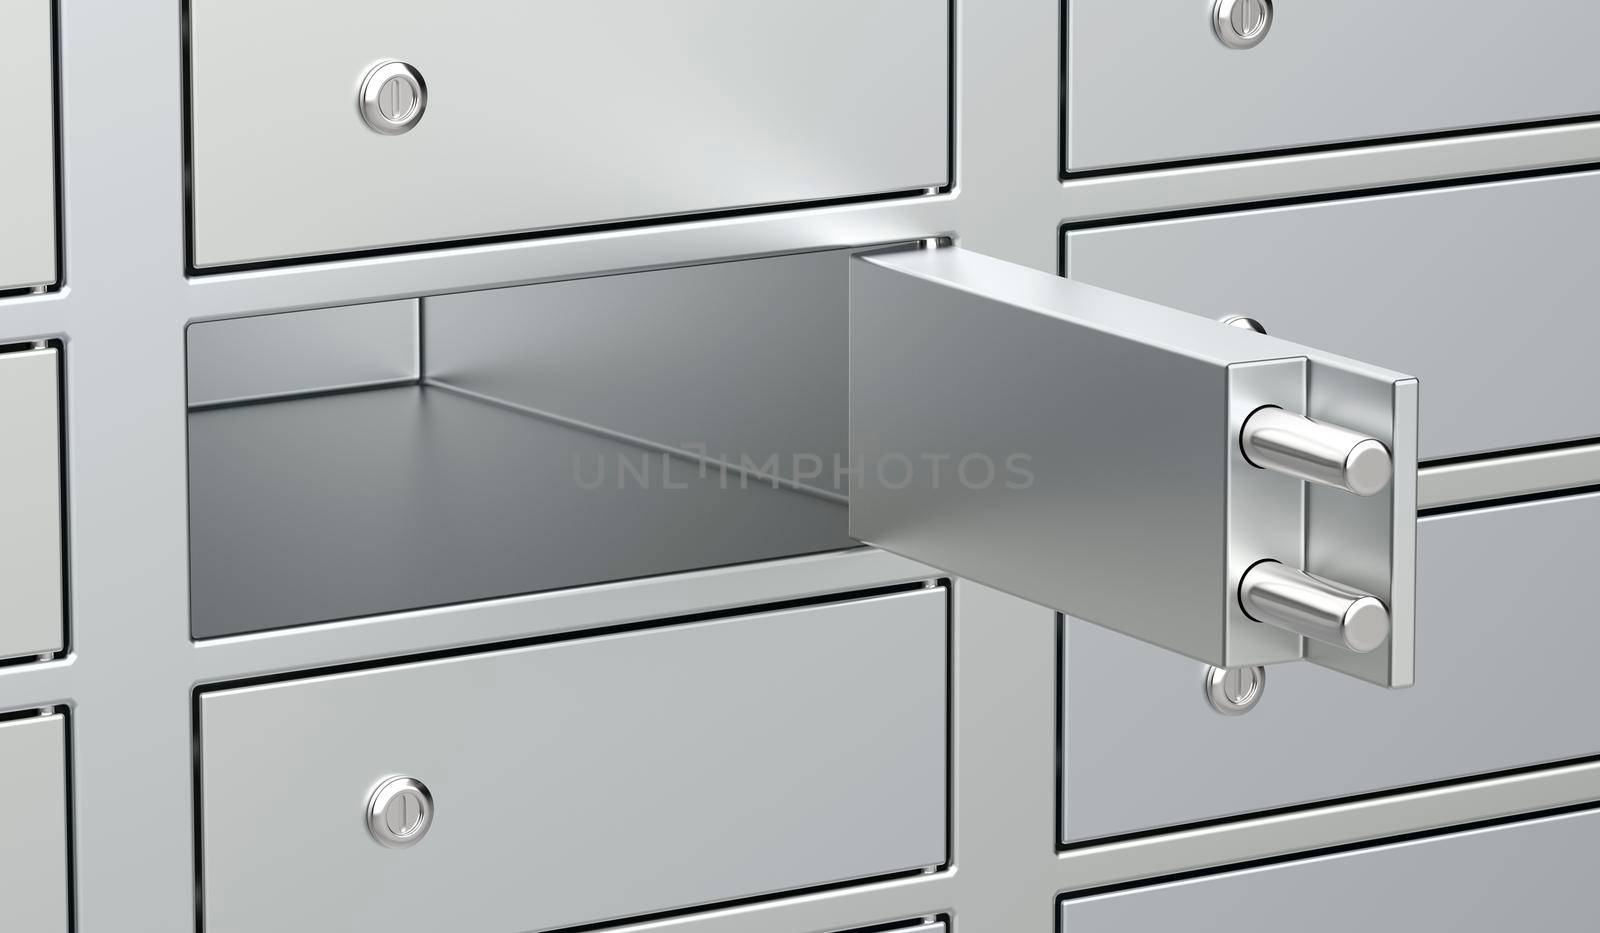 Empty bank deposit cell by magraphics